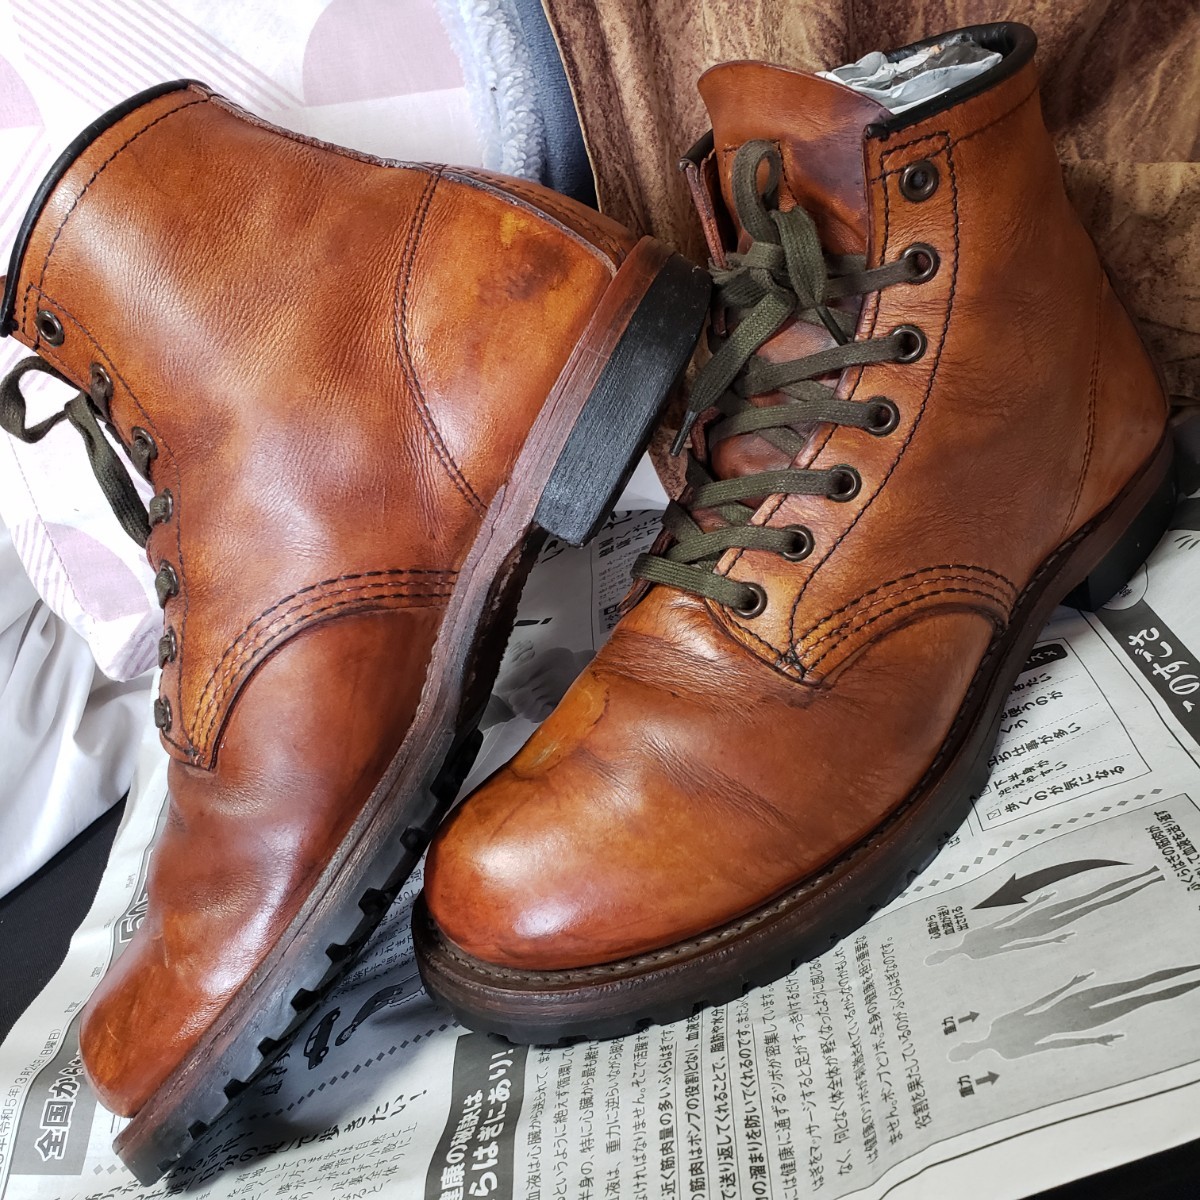 REDWING レッドウィング 9013 ベックマン BECKMAN 皮革 leather レザー boots ブーツ 米国製 made in USA シューズ shoes チェスナット 7.5